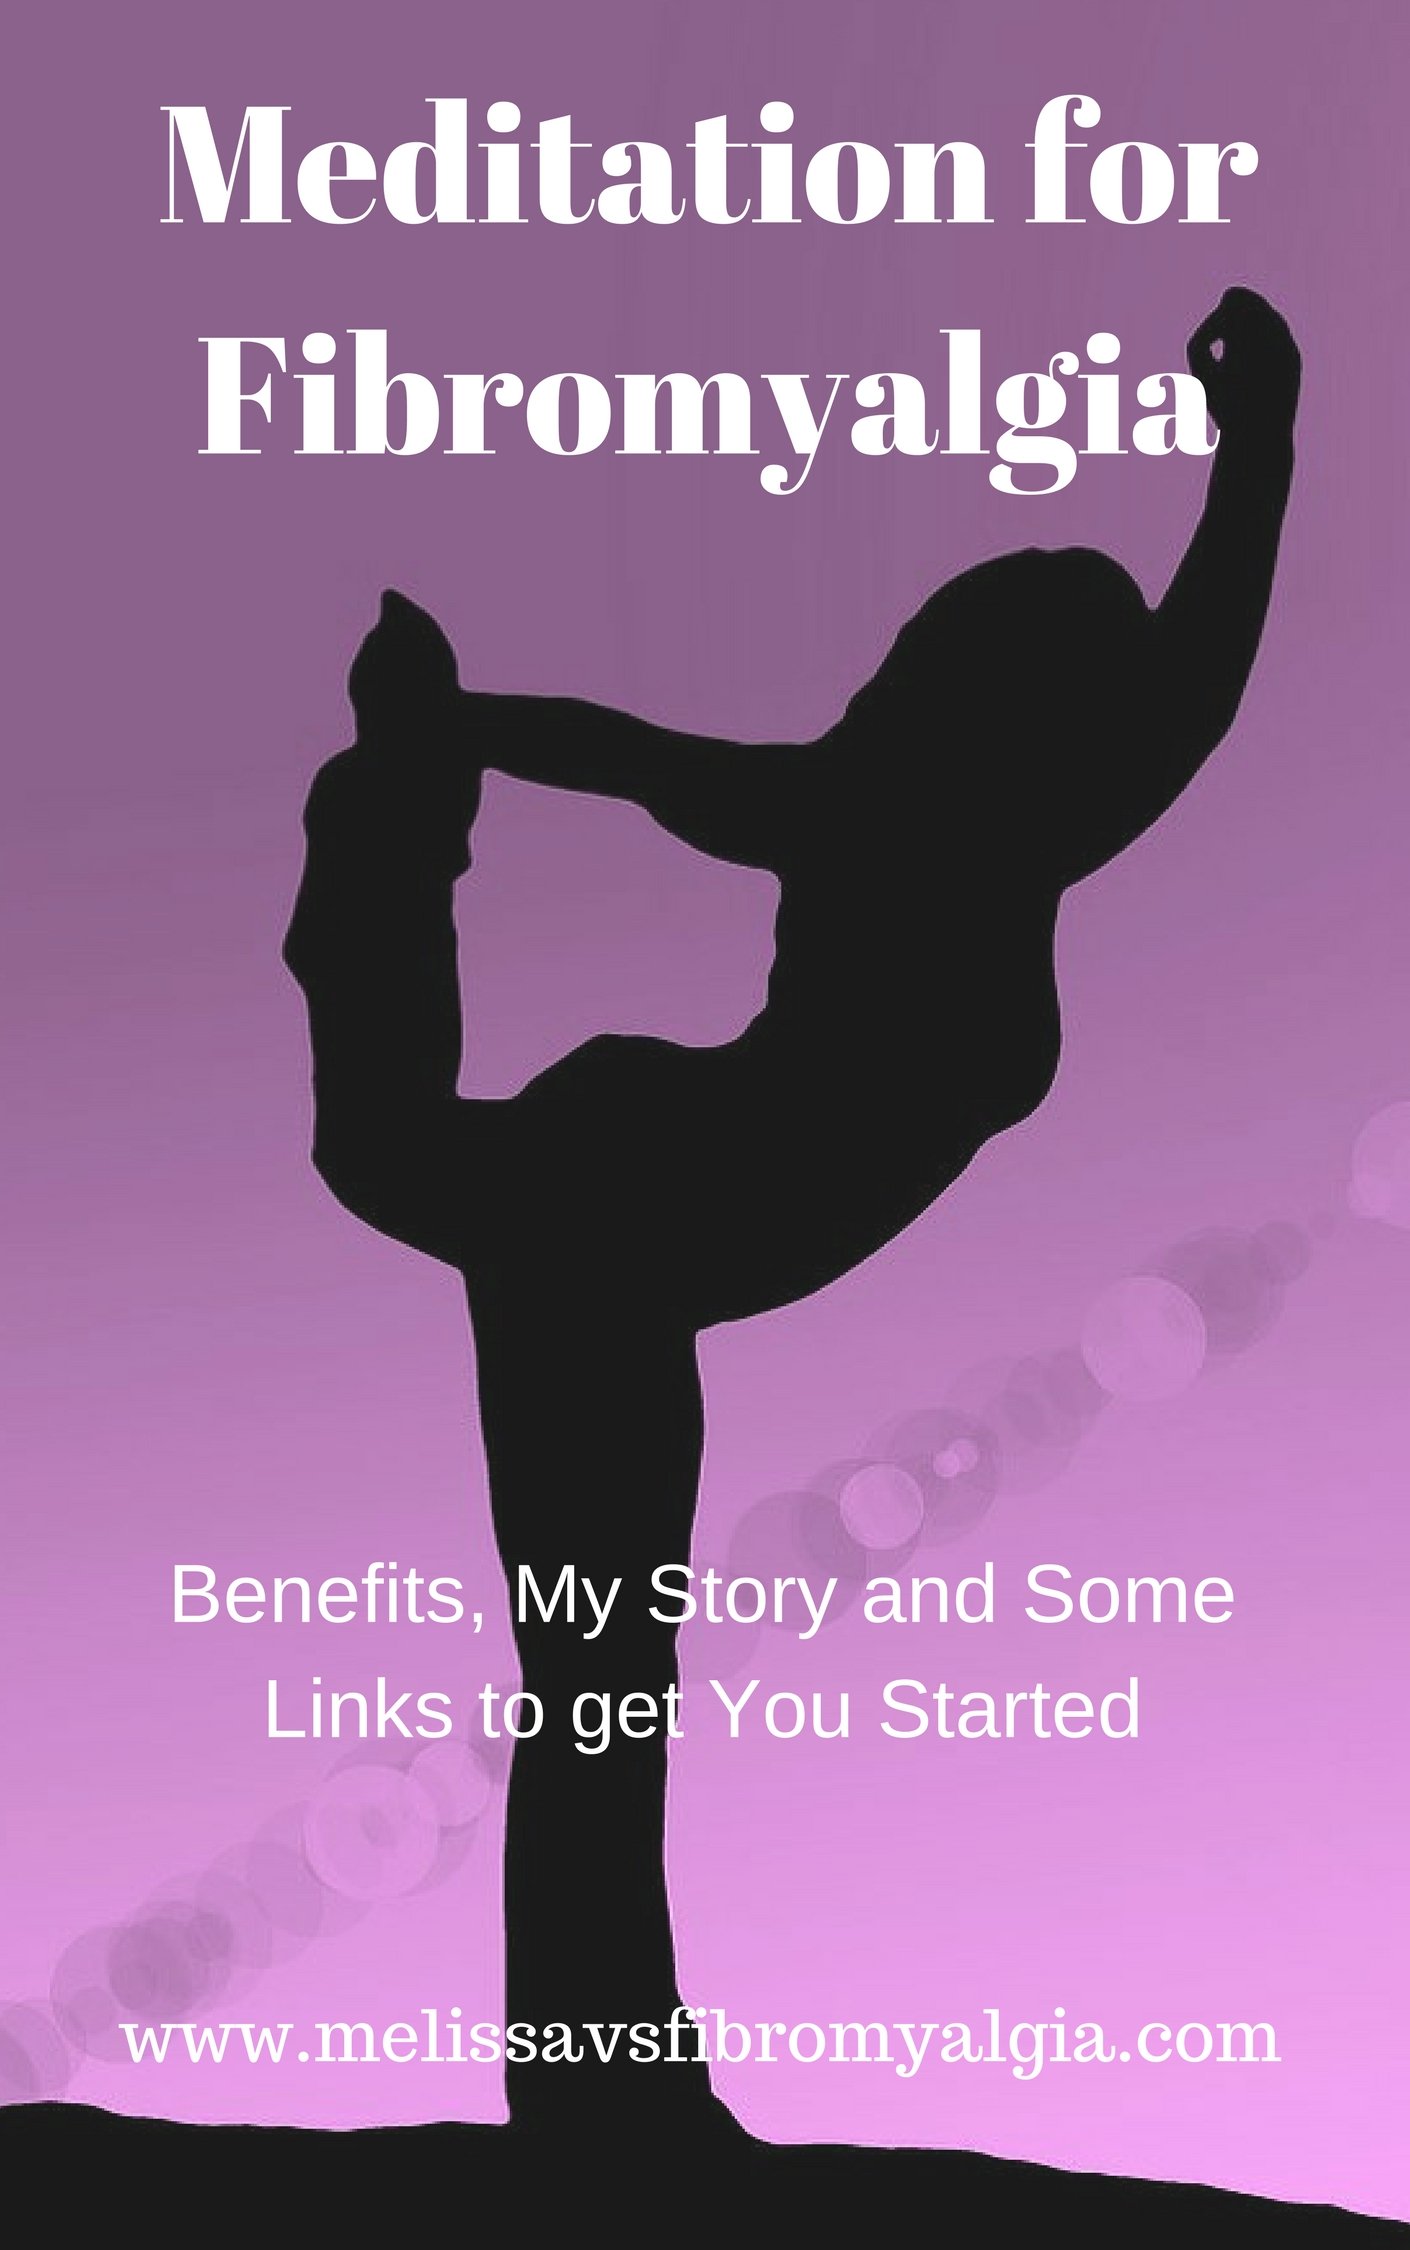 The Benefits of Yoga for People with Fibromyalgia